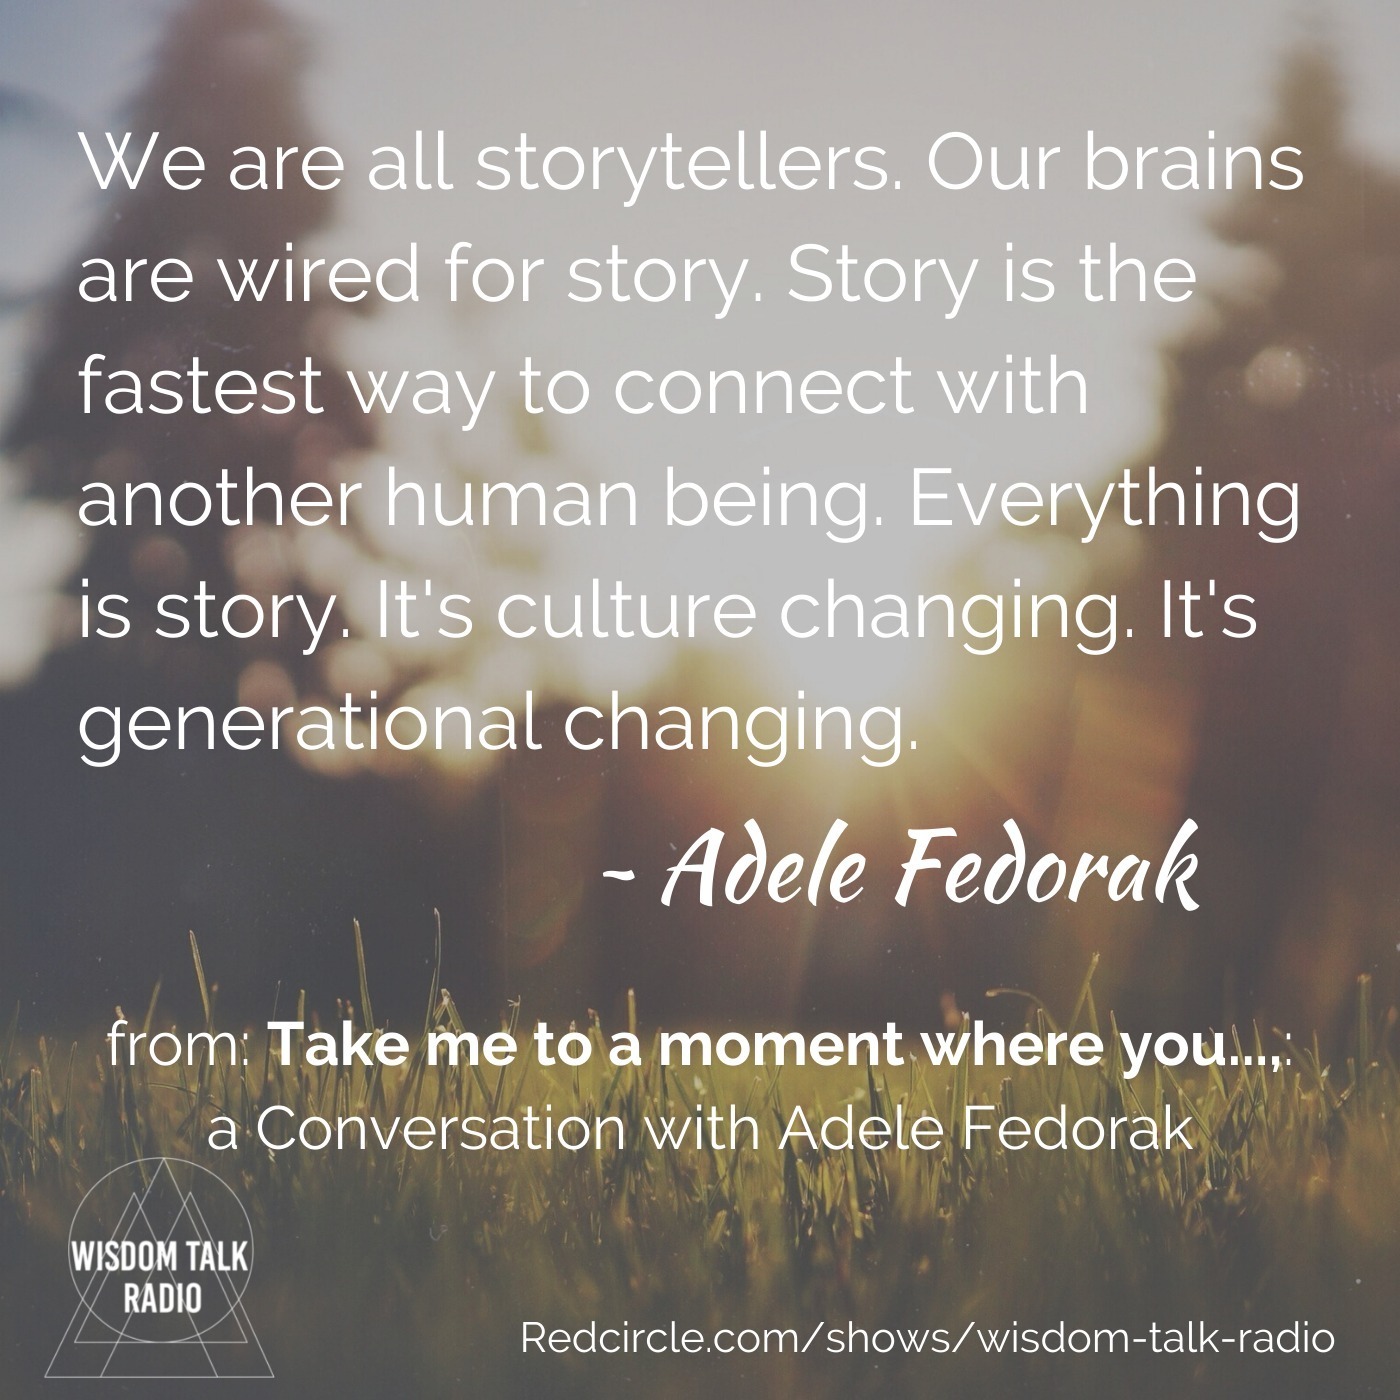 Take me to a moment when you..., a conversation with Adele Fedorak